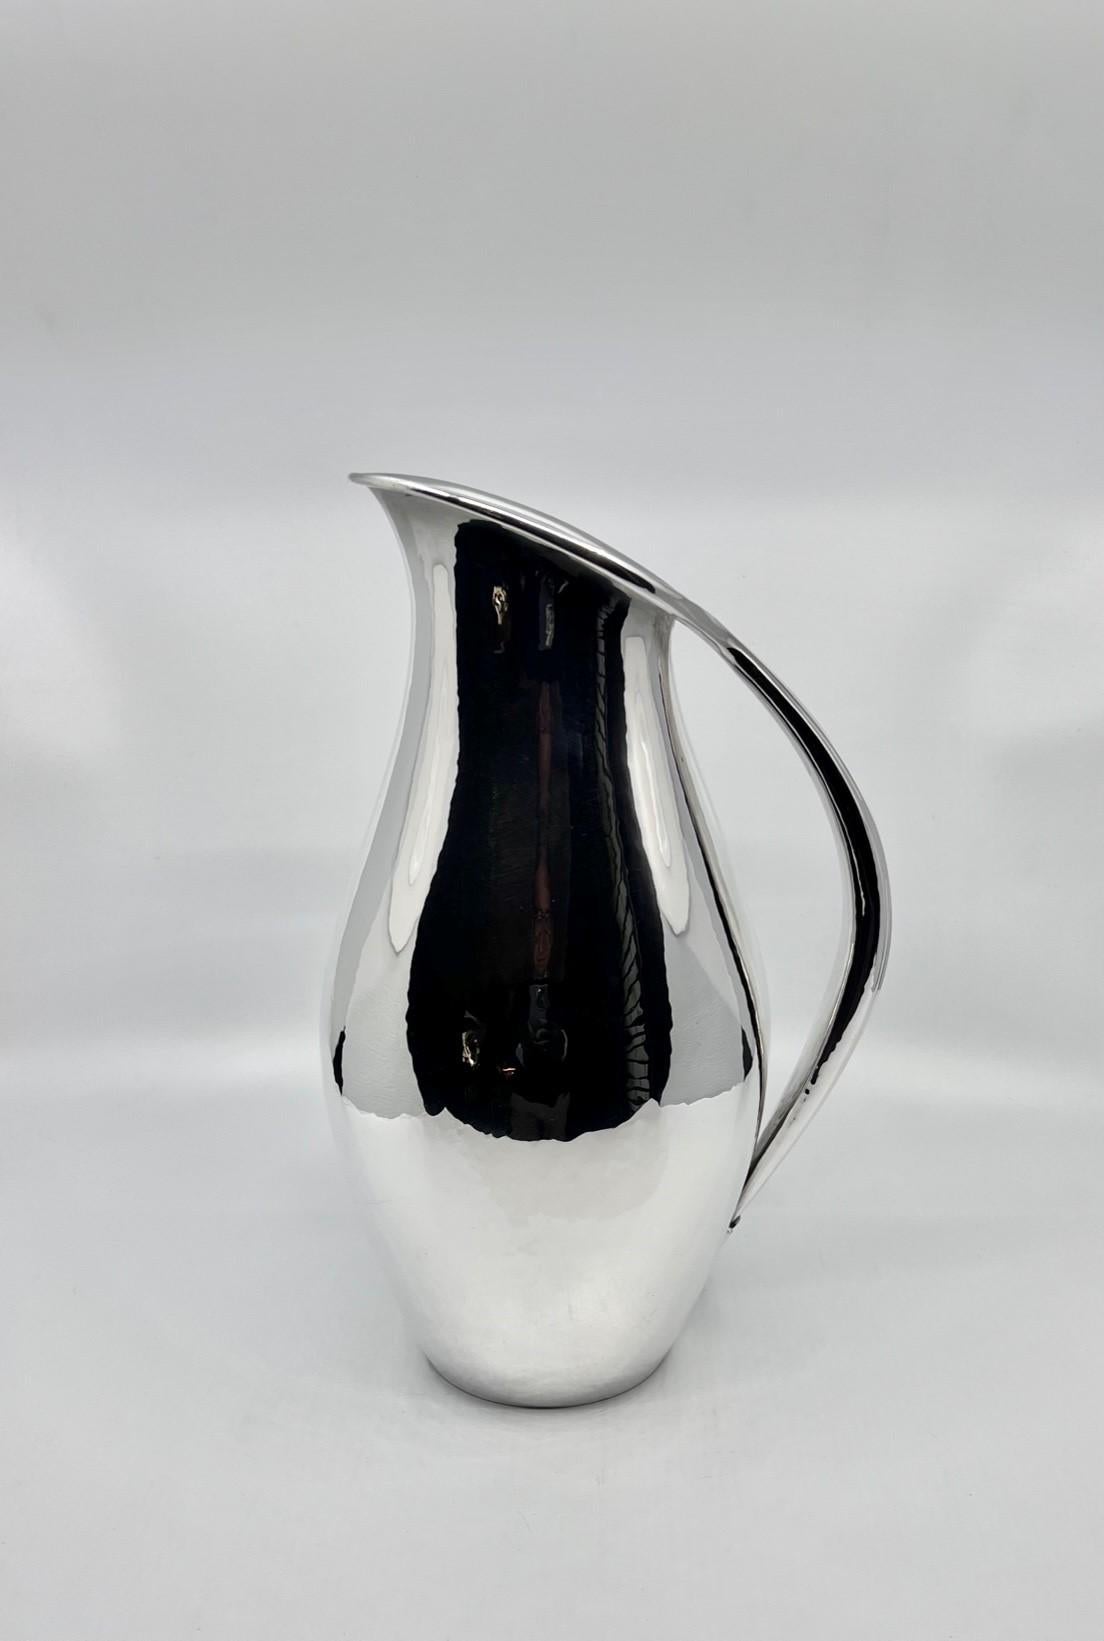 An early extra large Georg Jensen sterling silver pitcher, design #432C by Johan Rohde from 1920.
This design for Rohde was the topic of many conversations between him and Georg Jensen, as this minimalistic look was in 1920 ahead of its time, after